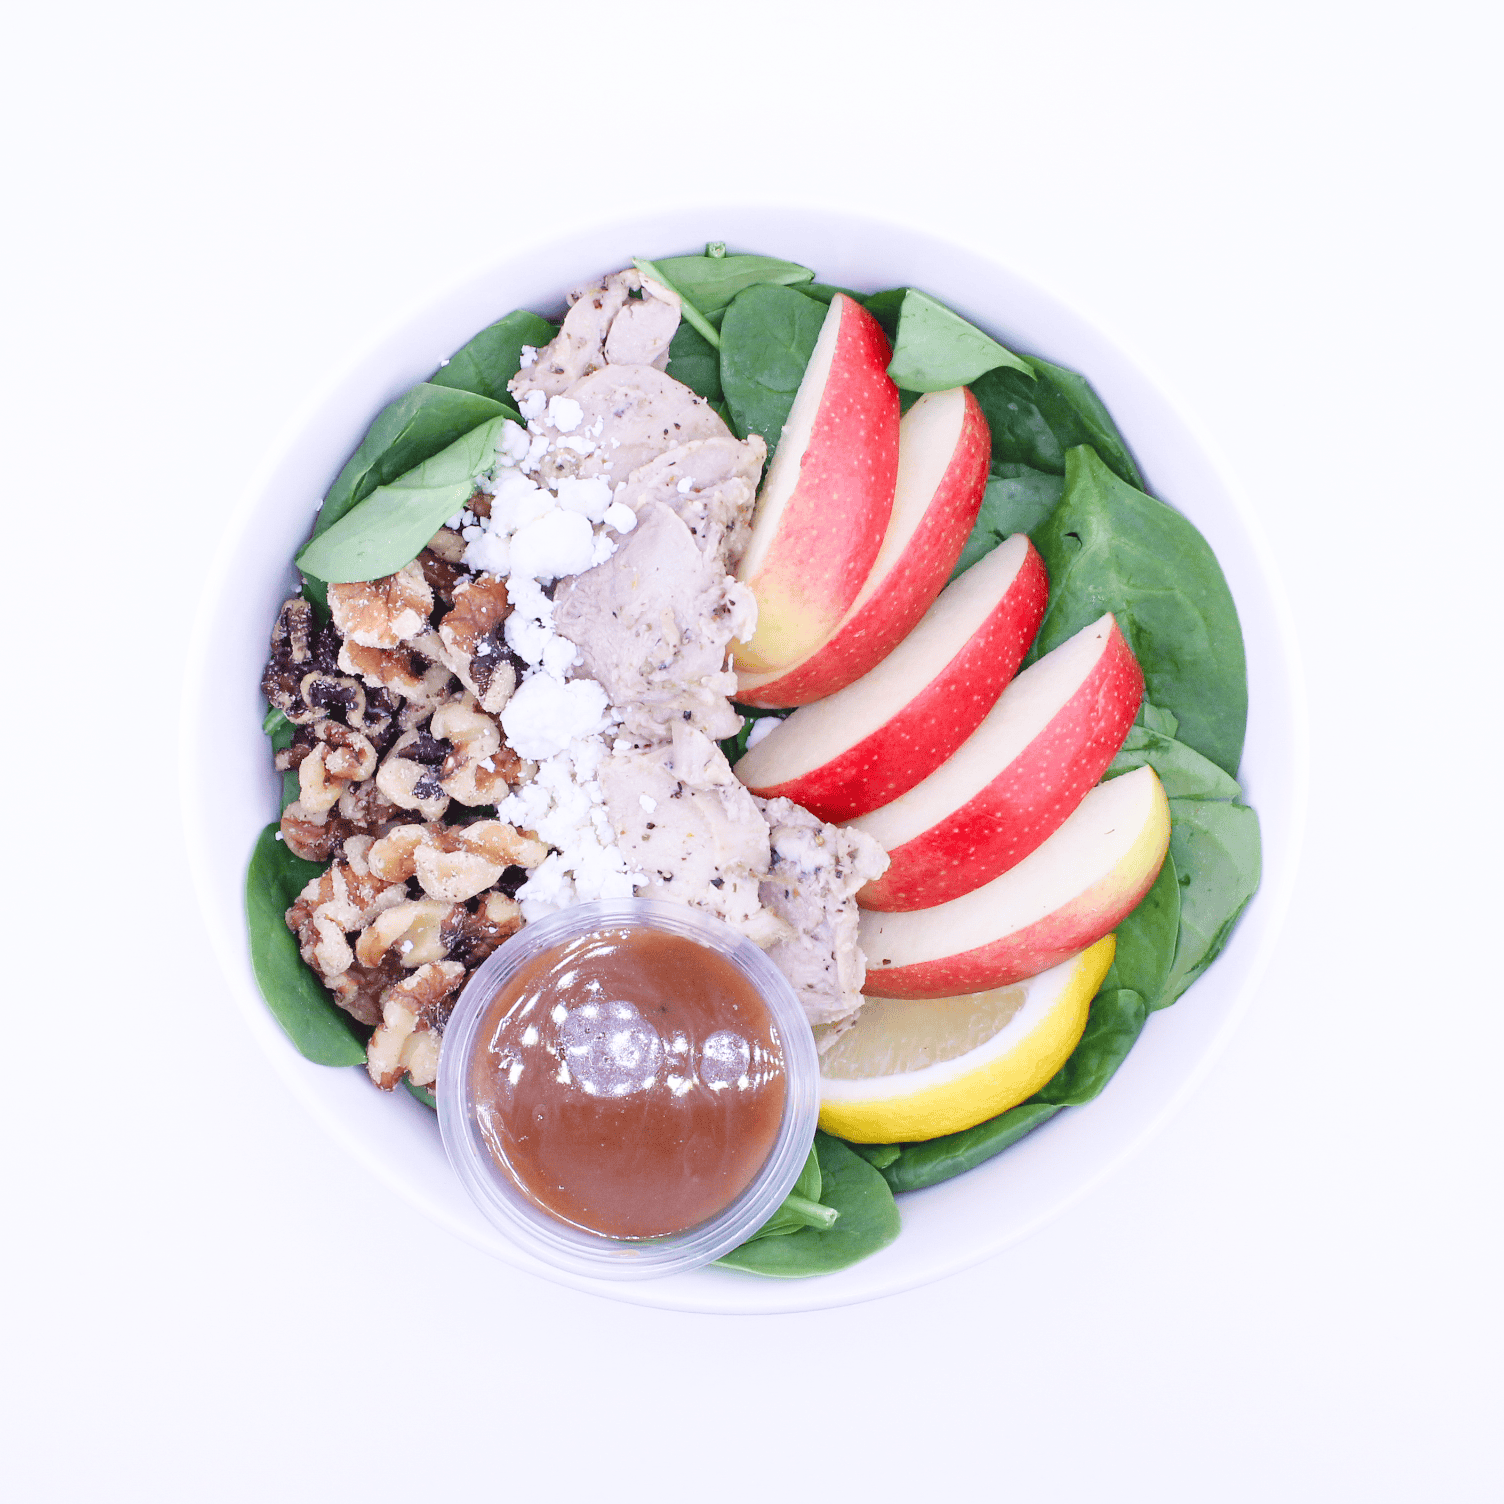 Chicken, apples, goat cheese, candied walnuts, spinach, balsamic vinaigrette